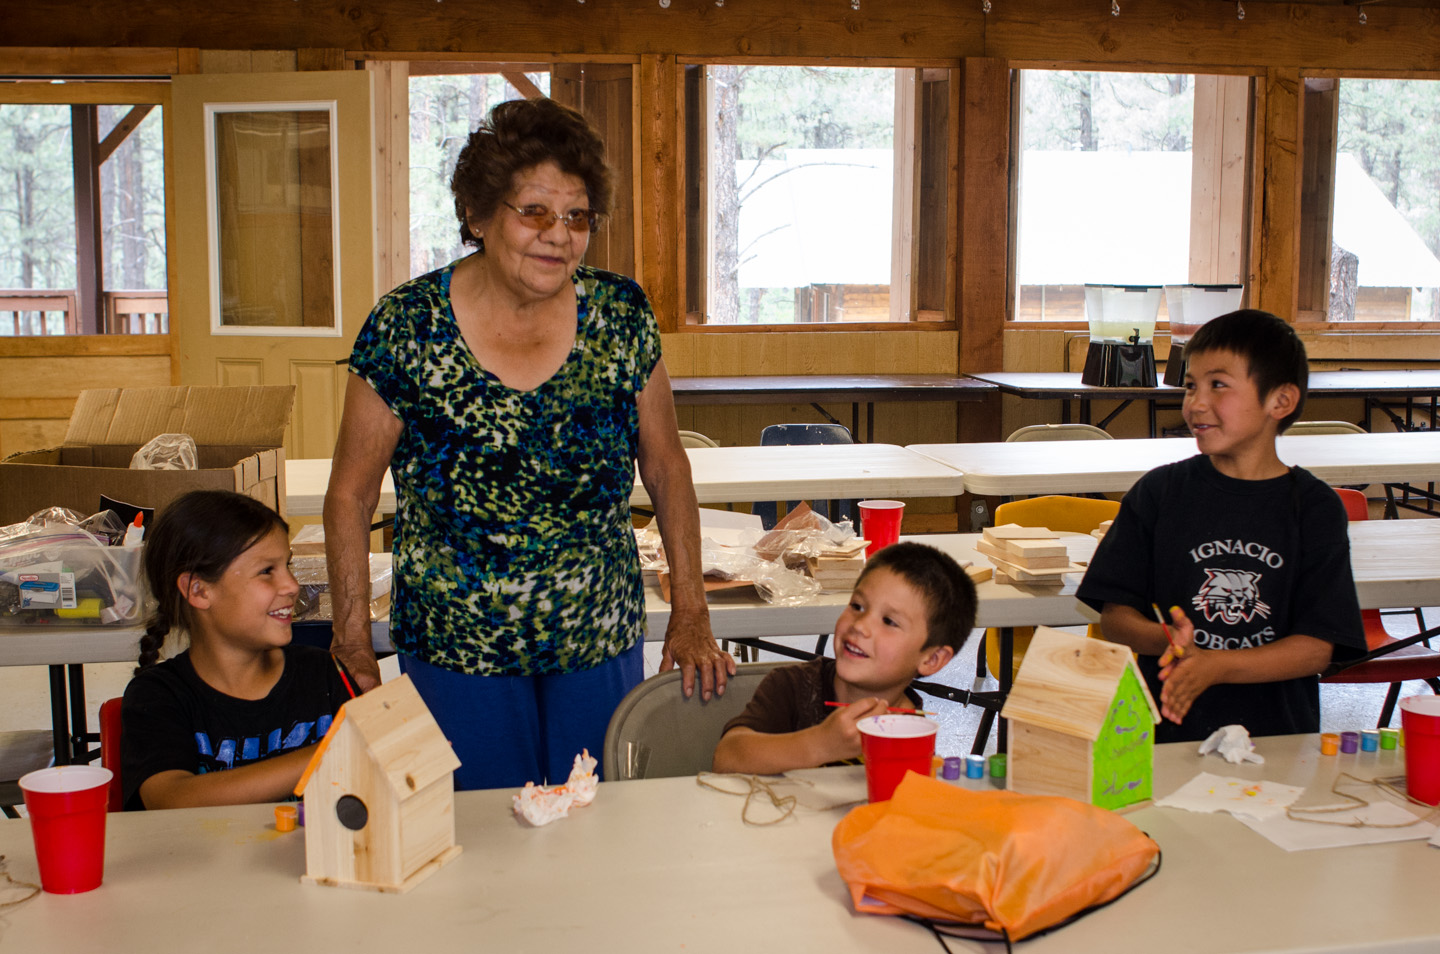 Southern Ute elder Evelyn Russell works with camp participants to construct wooden birdhouses, which the students painted themselves.